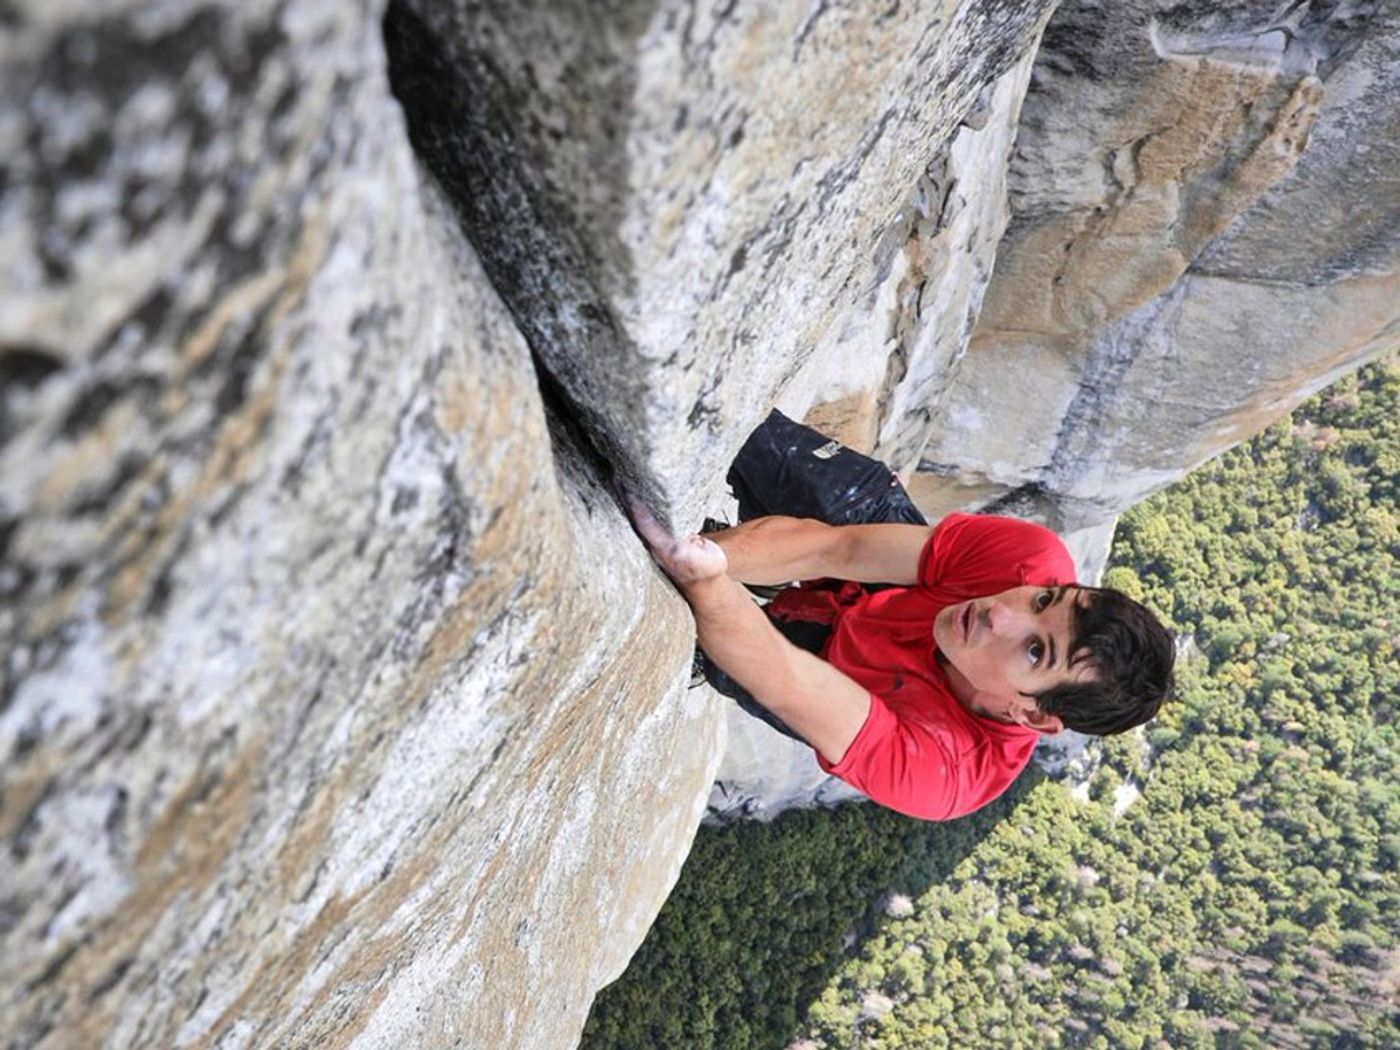 Professional climber, Alex Honnold, who was the first to scale El Cap without a rope. Photo: www.alexhonnold.com